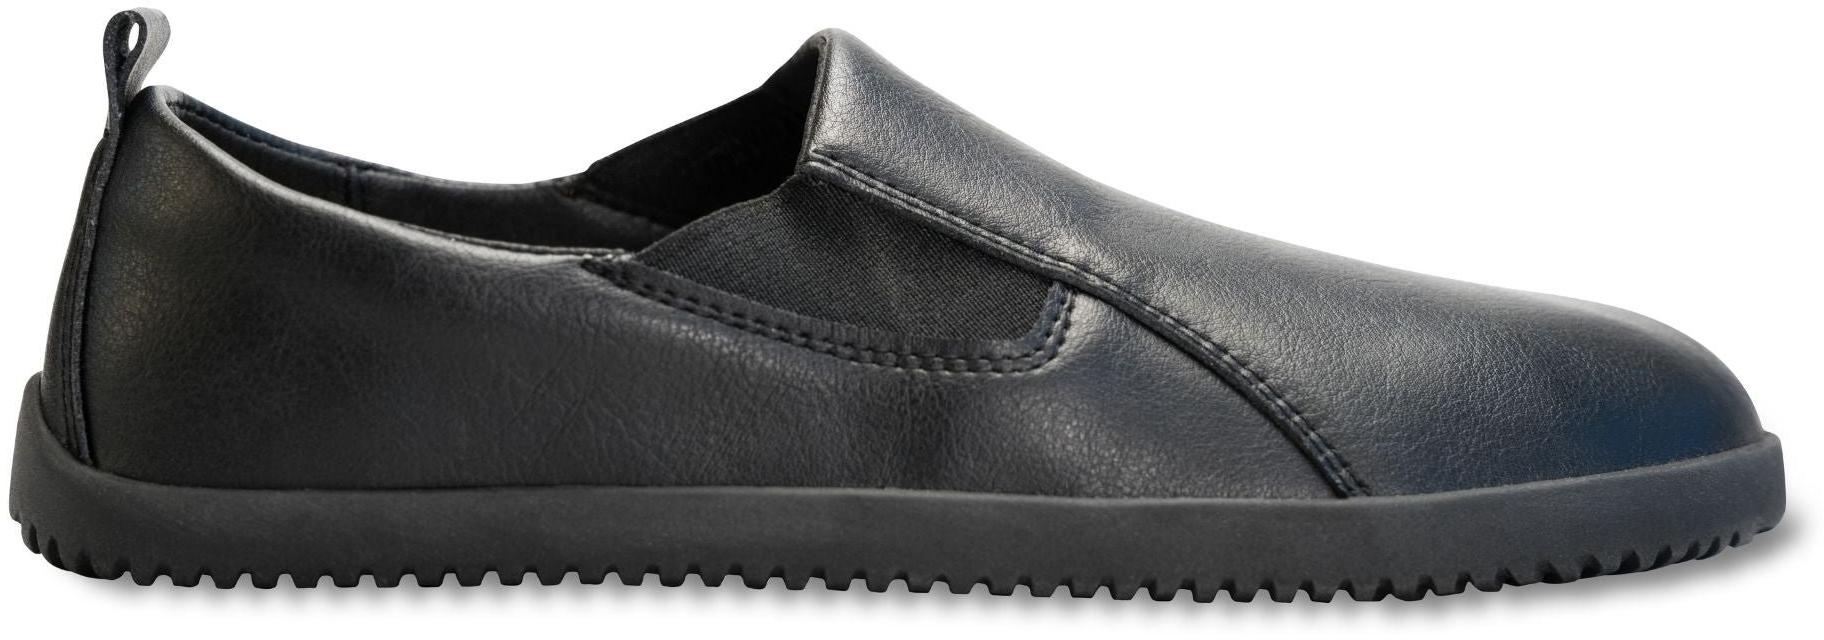 Ahinsa Shoes Women’s Slip-on Sneakers From Vegan Leather Barefoot